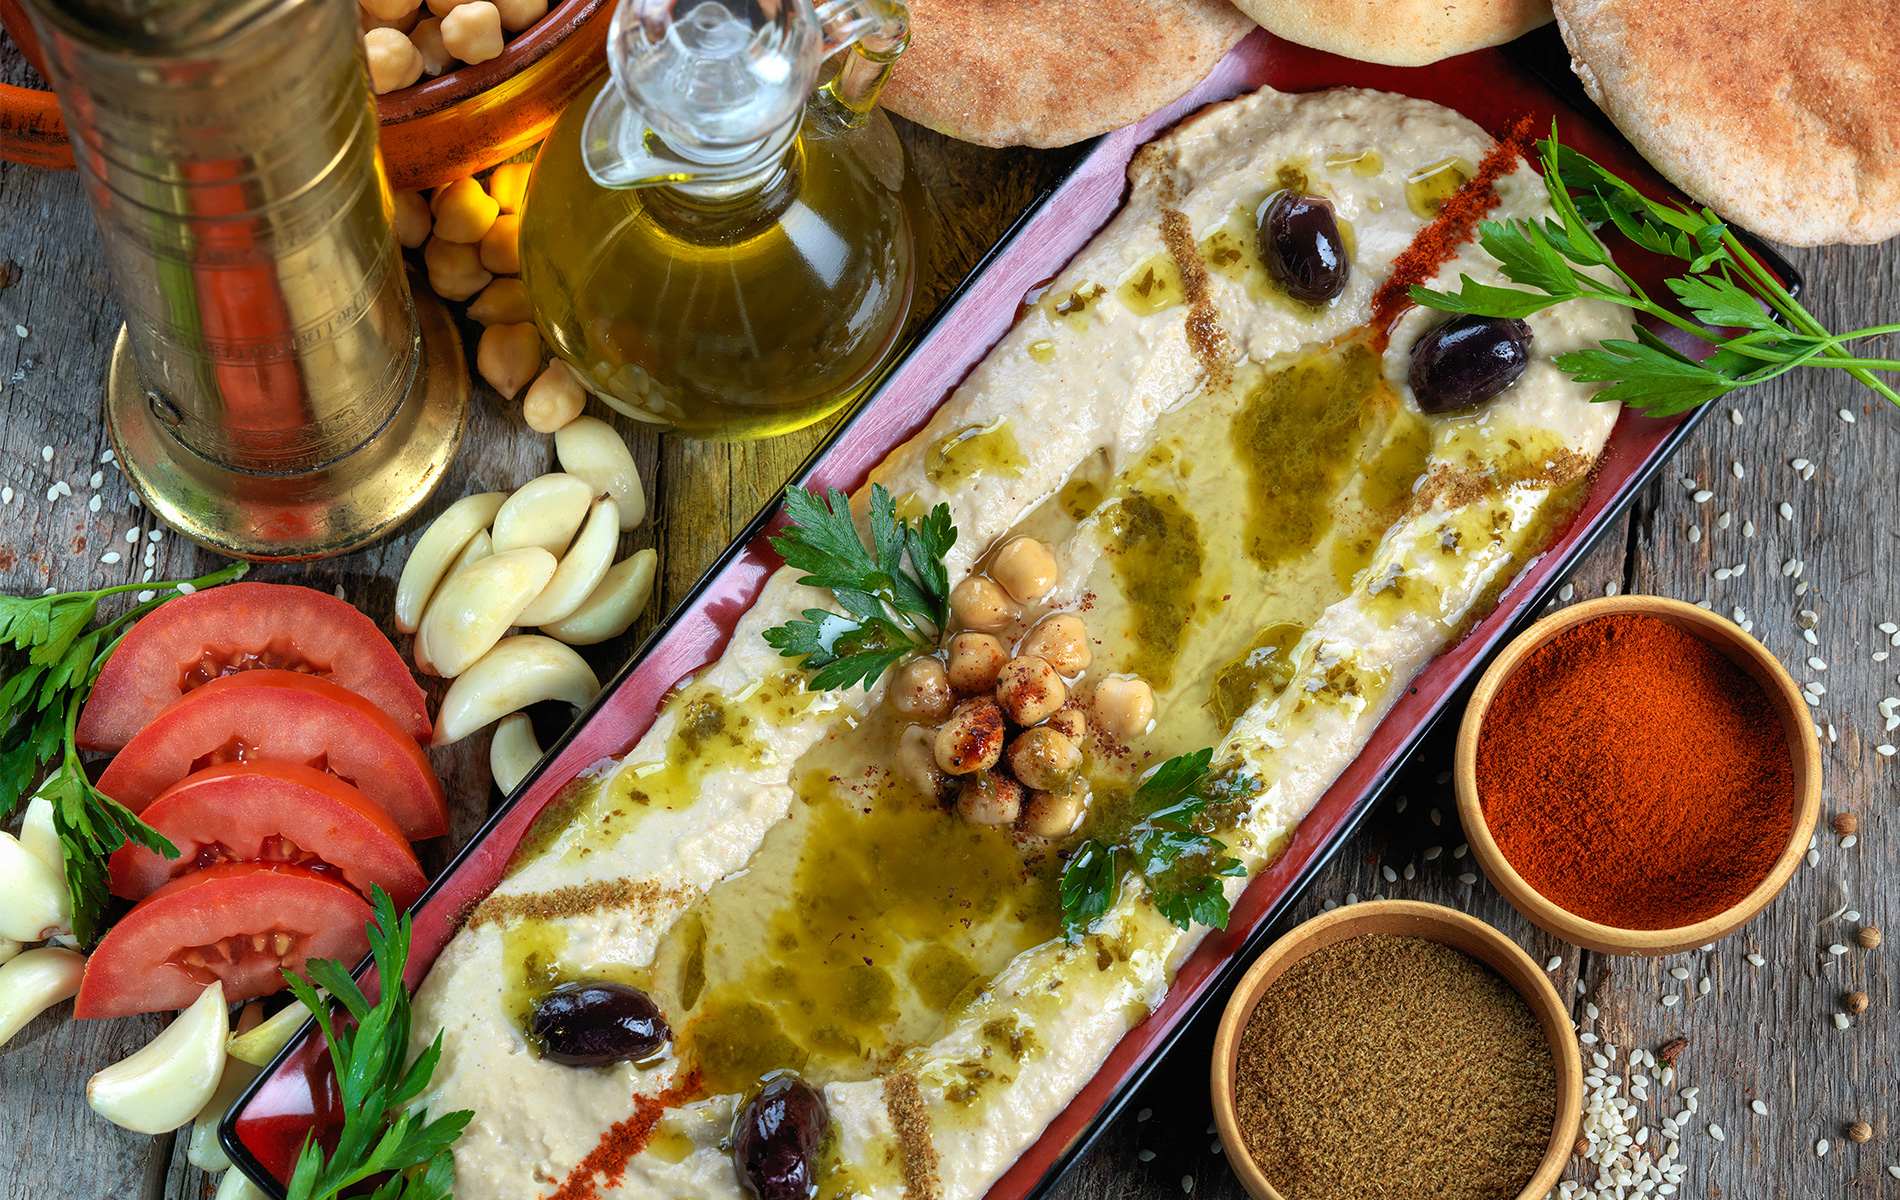 Large hummus platter on wooden table surrounded by pita bread and other fresh ingredients.